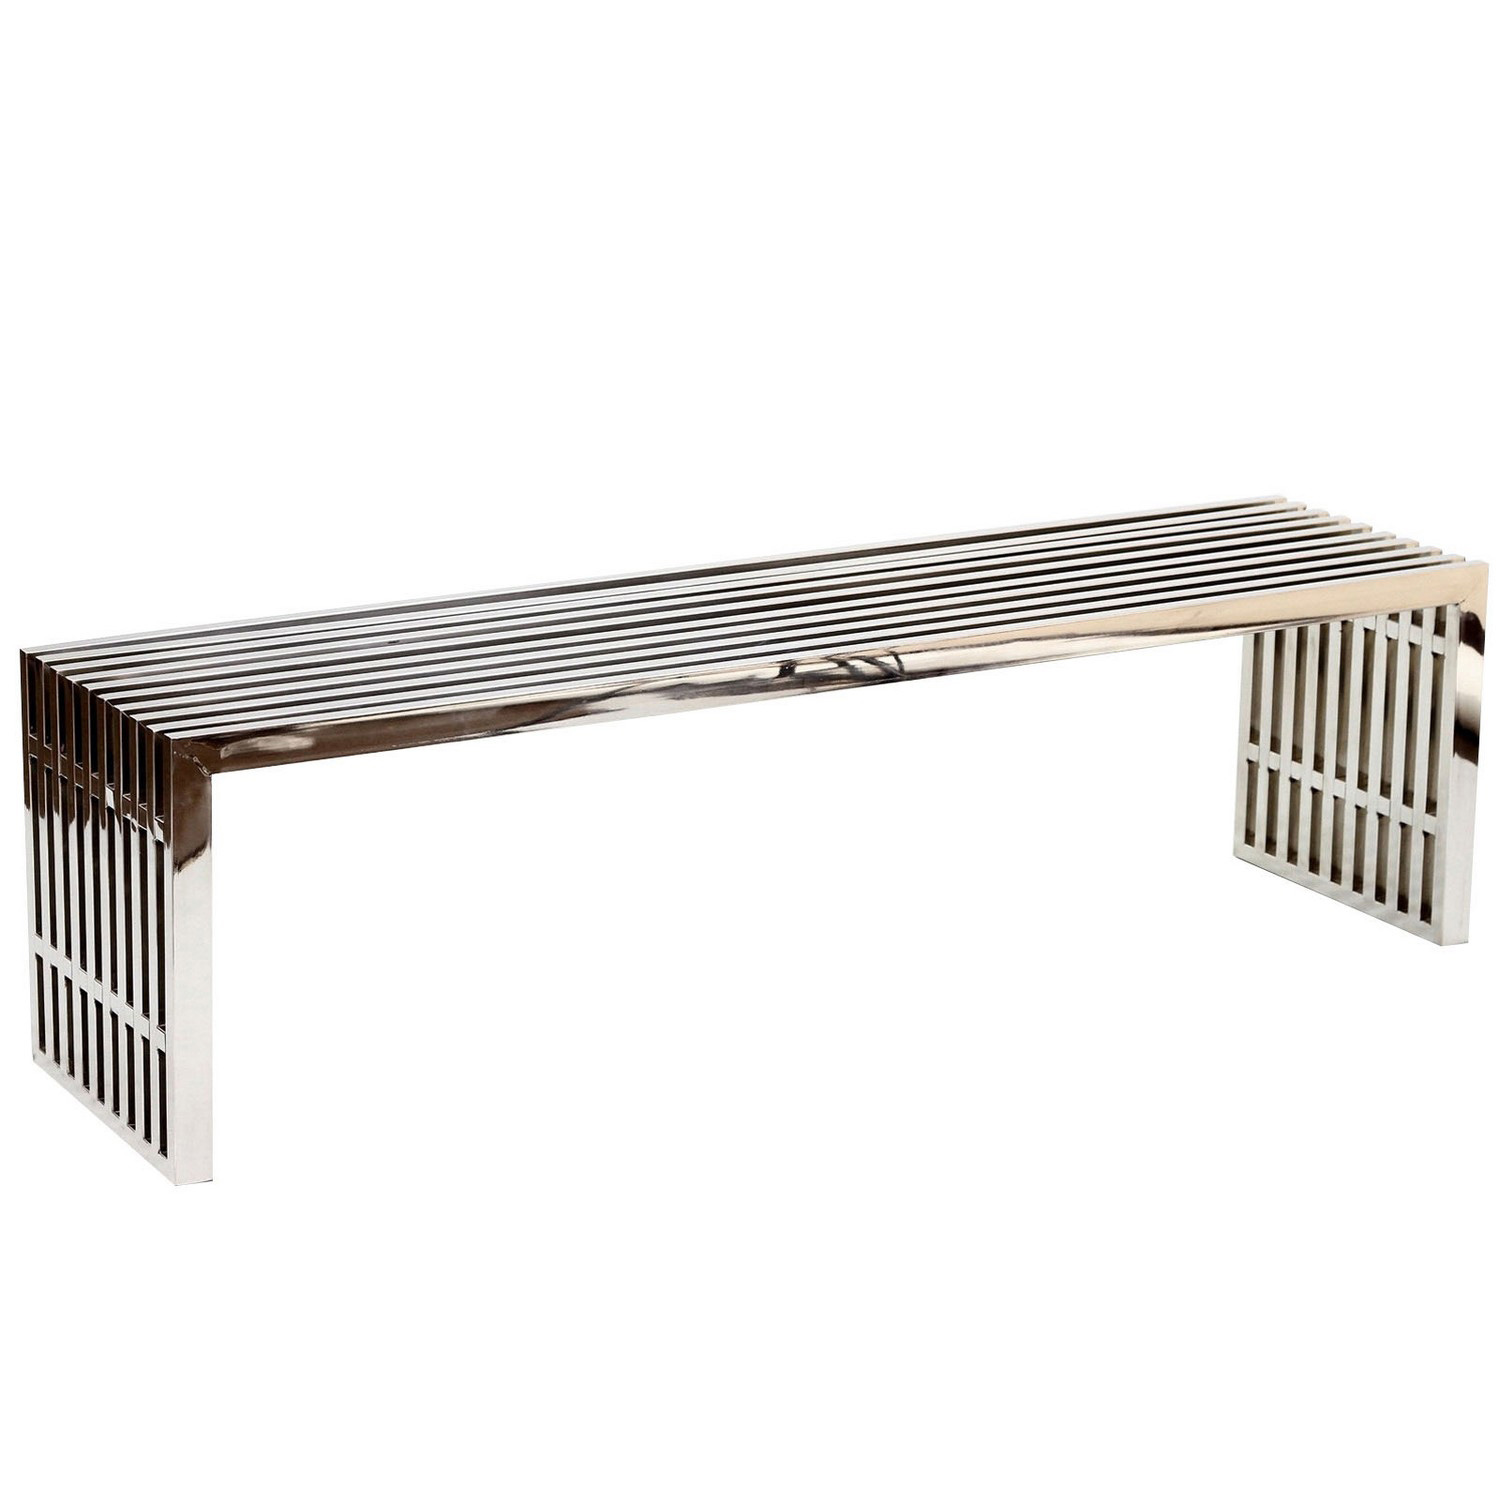 Modway Gridiron Large Bench - Silver